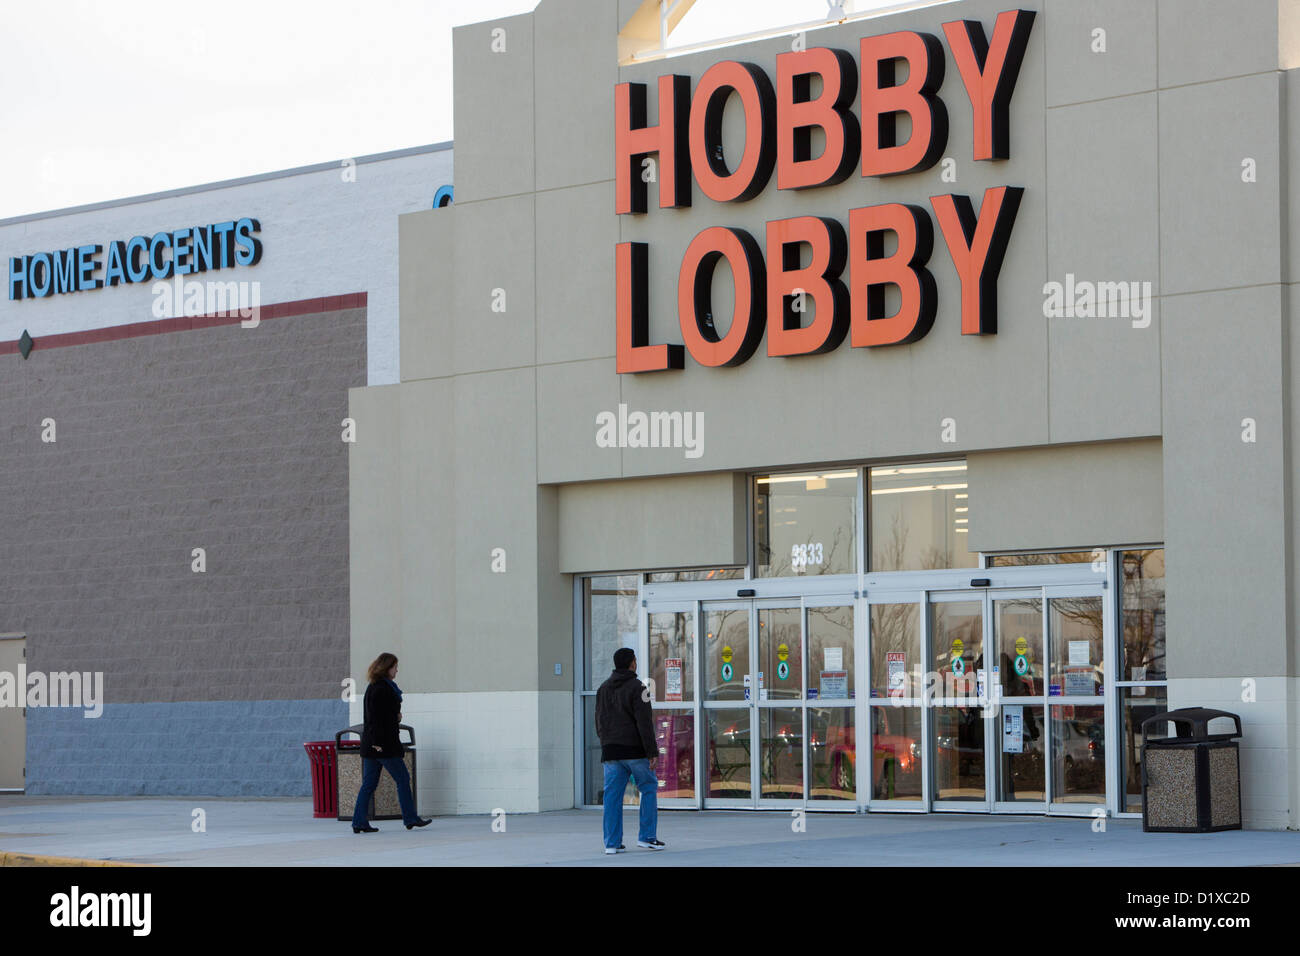 Un Hobby Lobby store. Banque D'Images